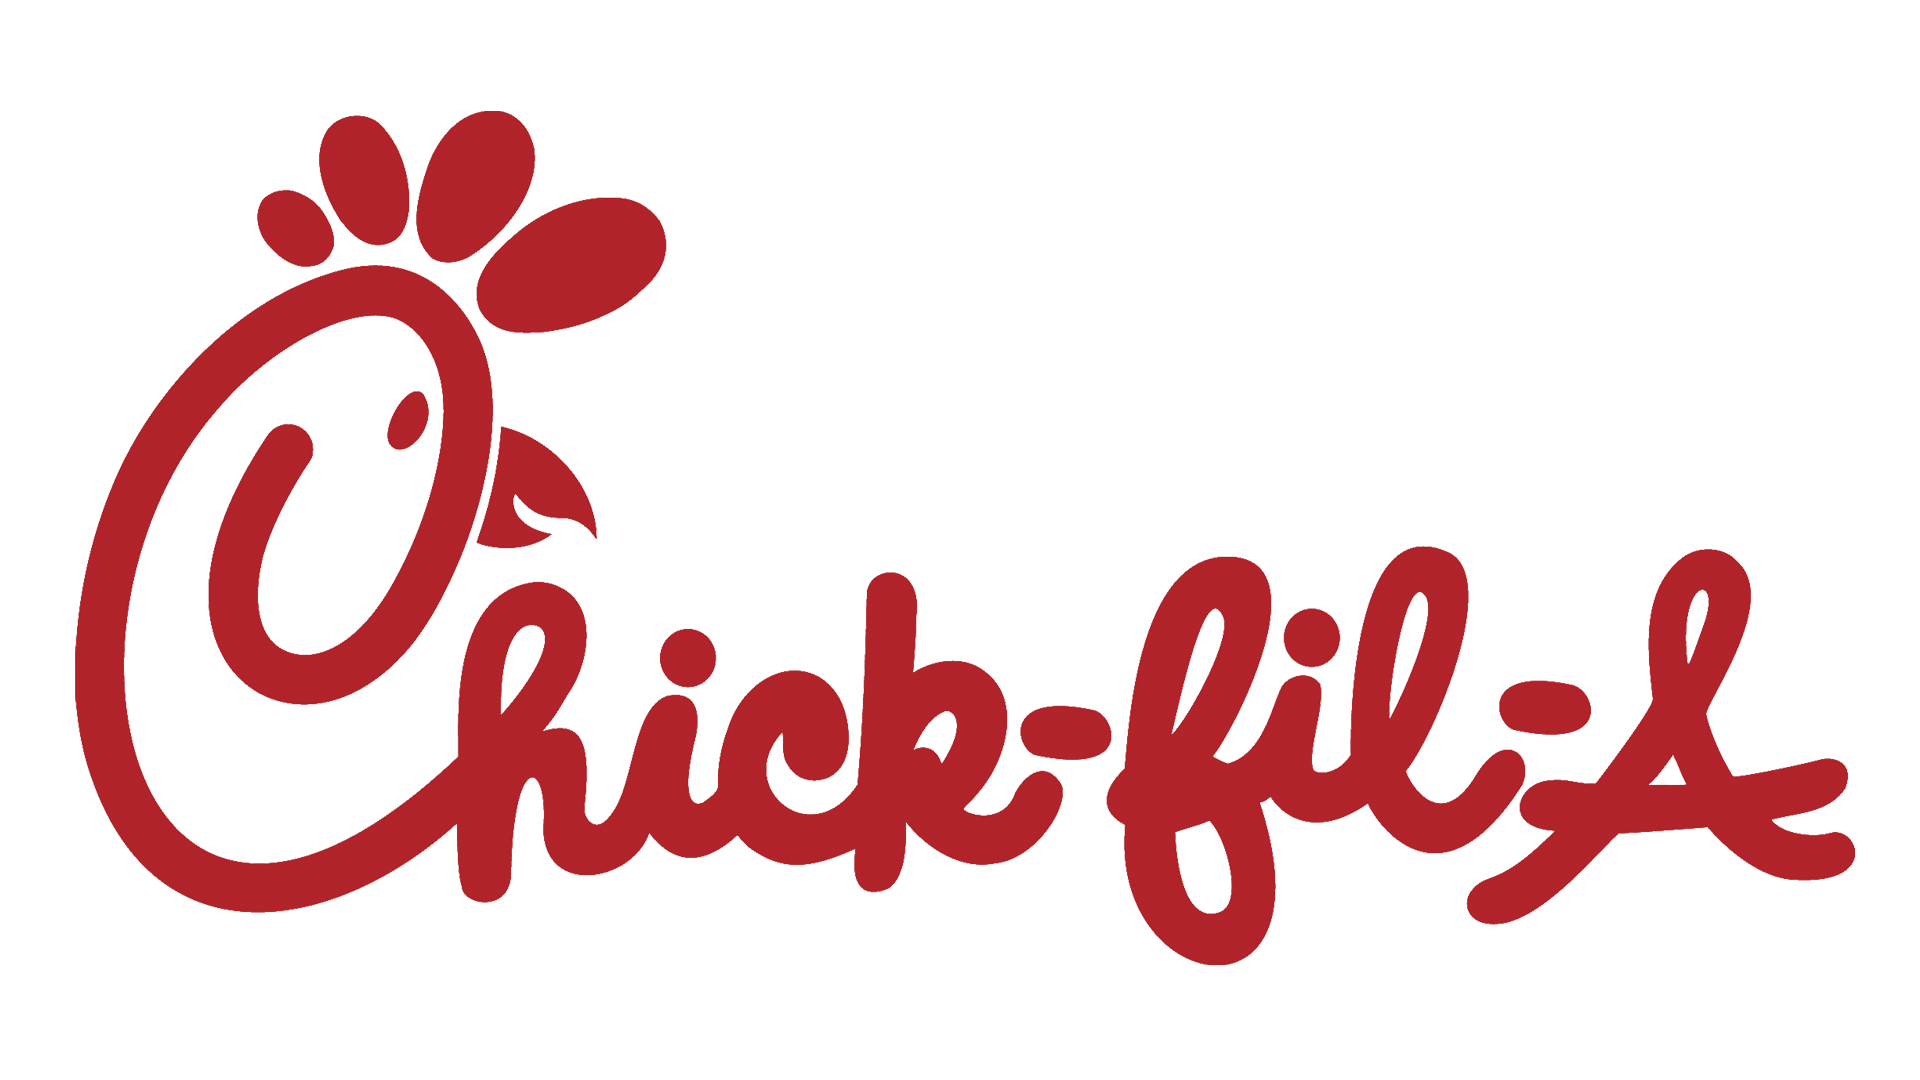 Chckfila Logo - Meaning Chick-fil-A logo and symbol | history and evolution